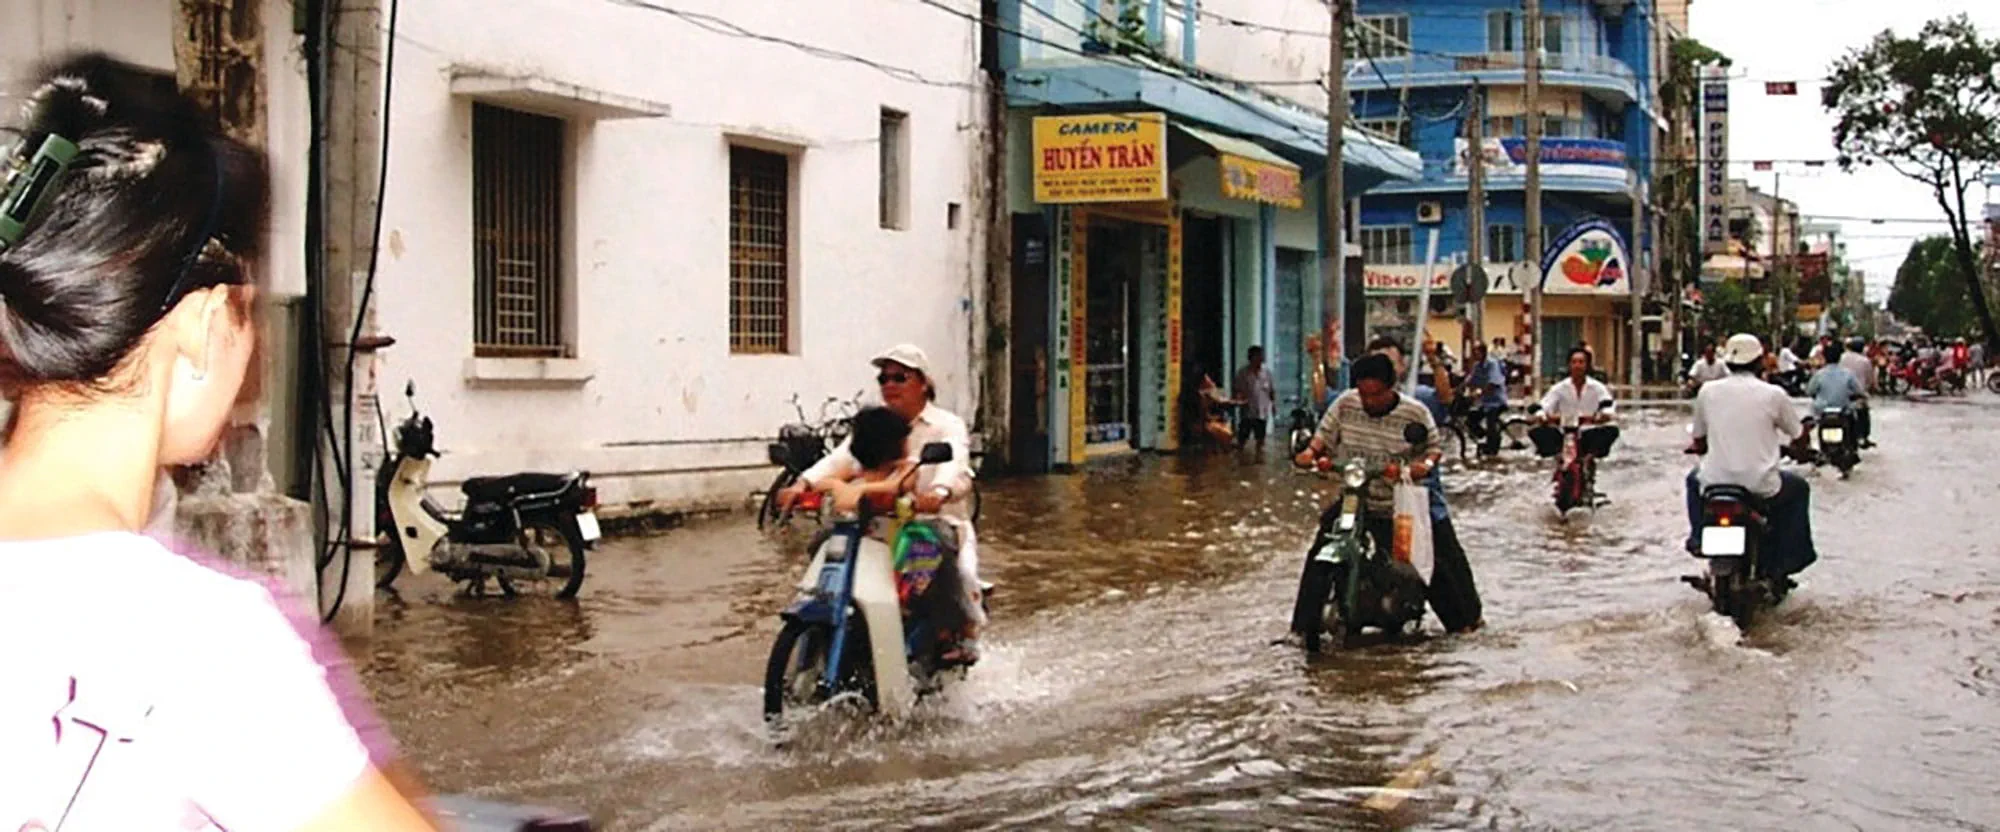 Flooded Asian street scene with mopeds